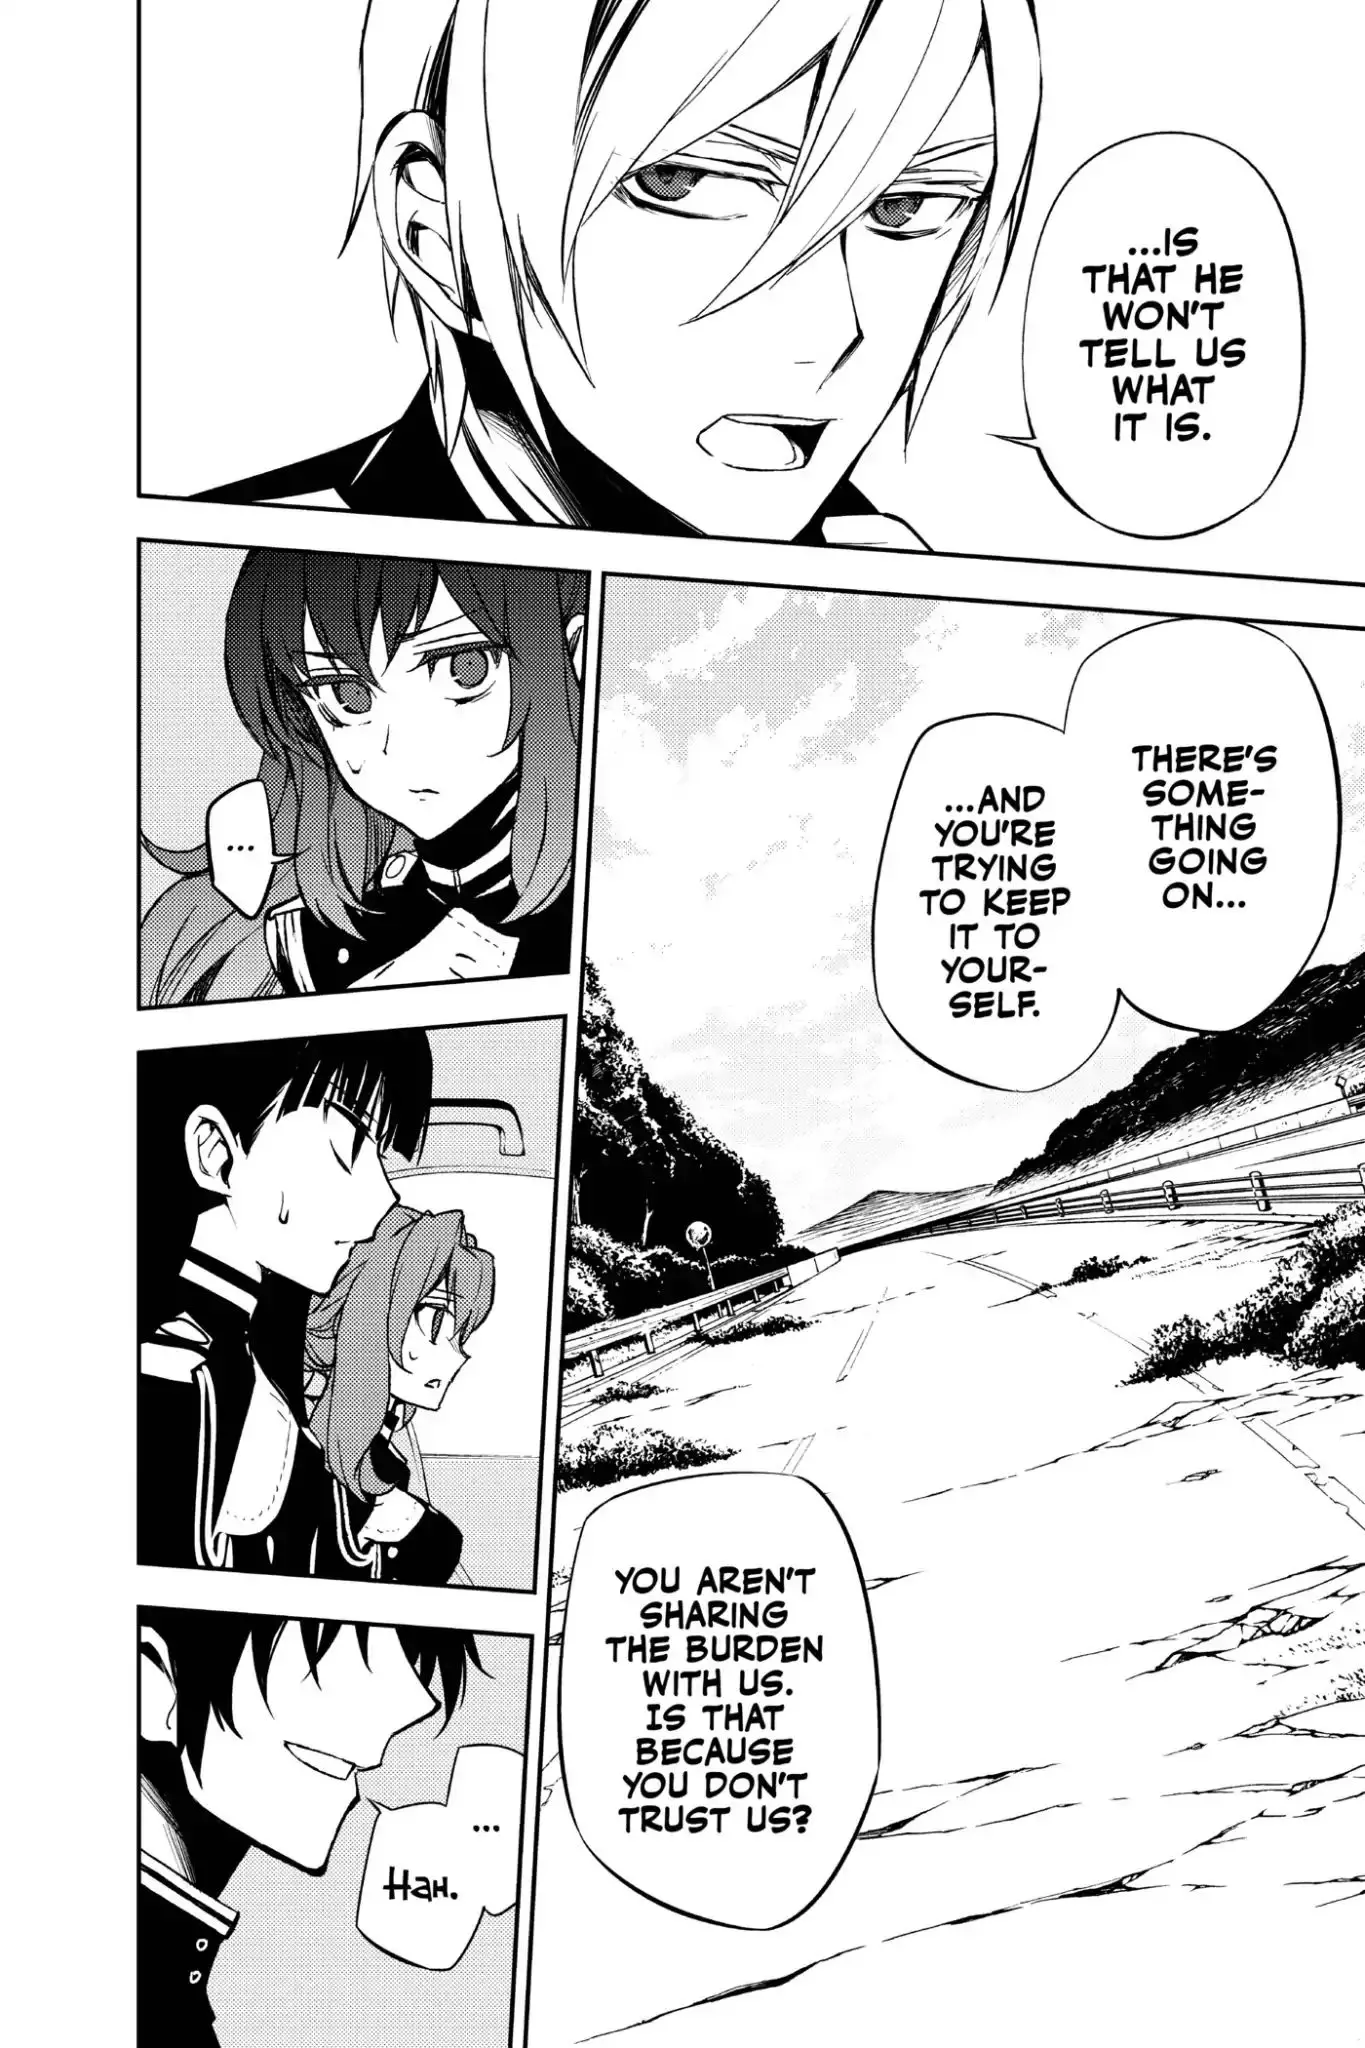 Seraph Of The End - 54 page 19-8042a3fa